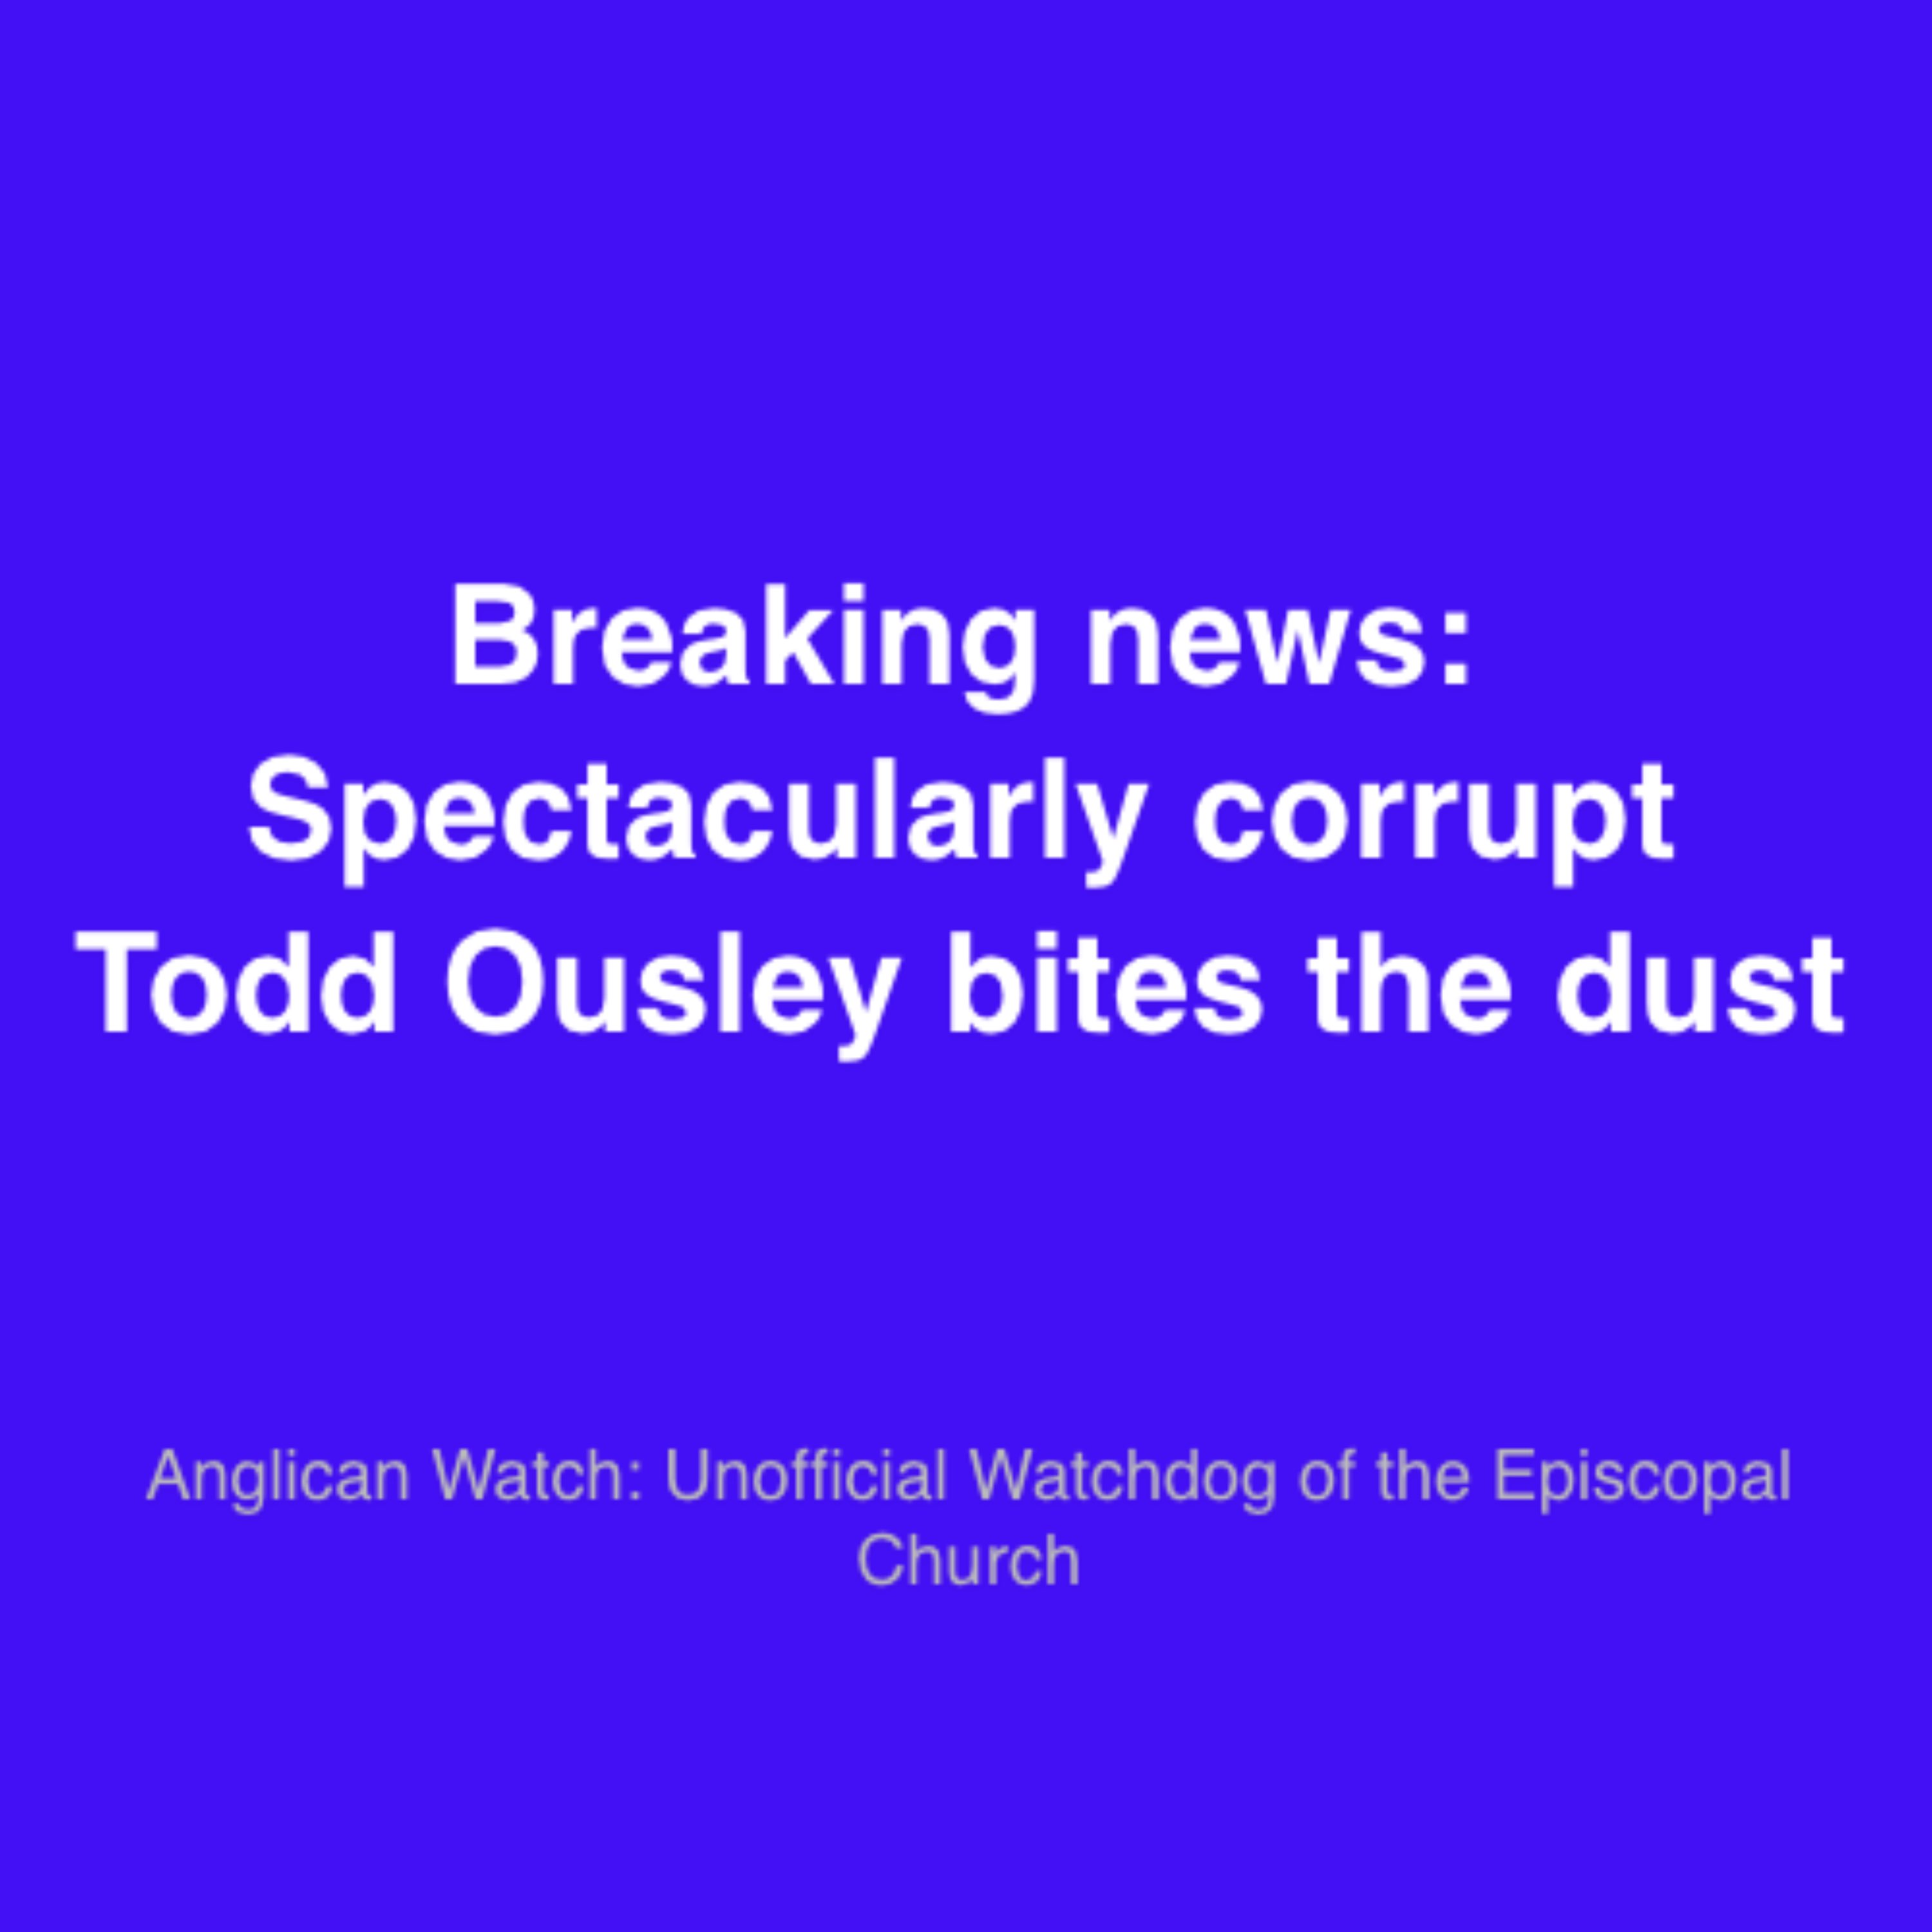 Breaking news: Spectacularly corrupt Todd Ousley bites the dust